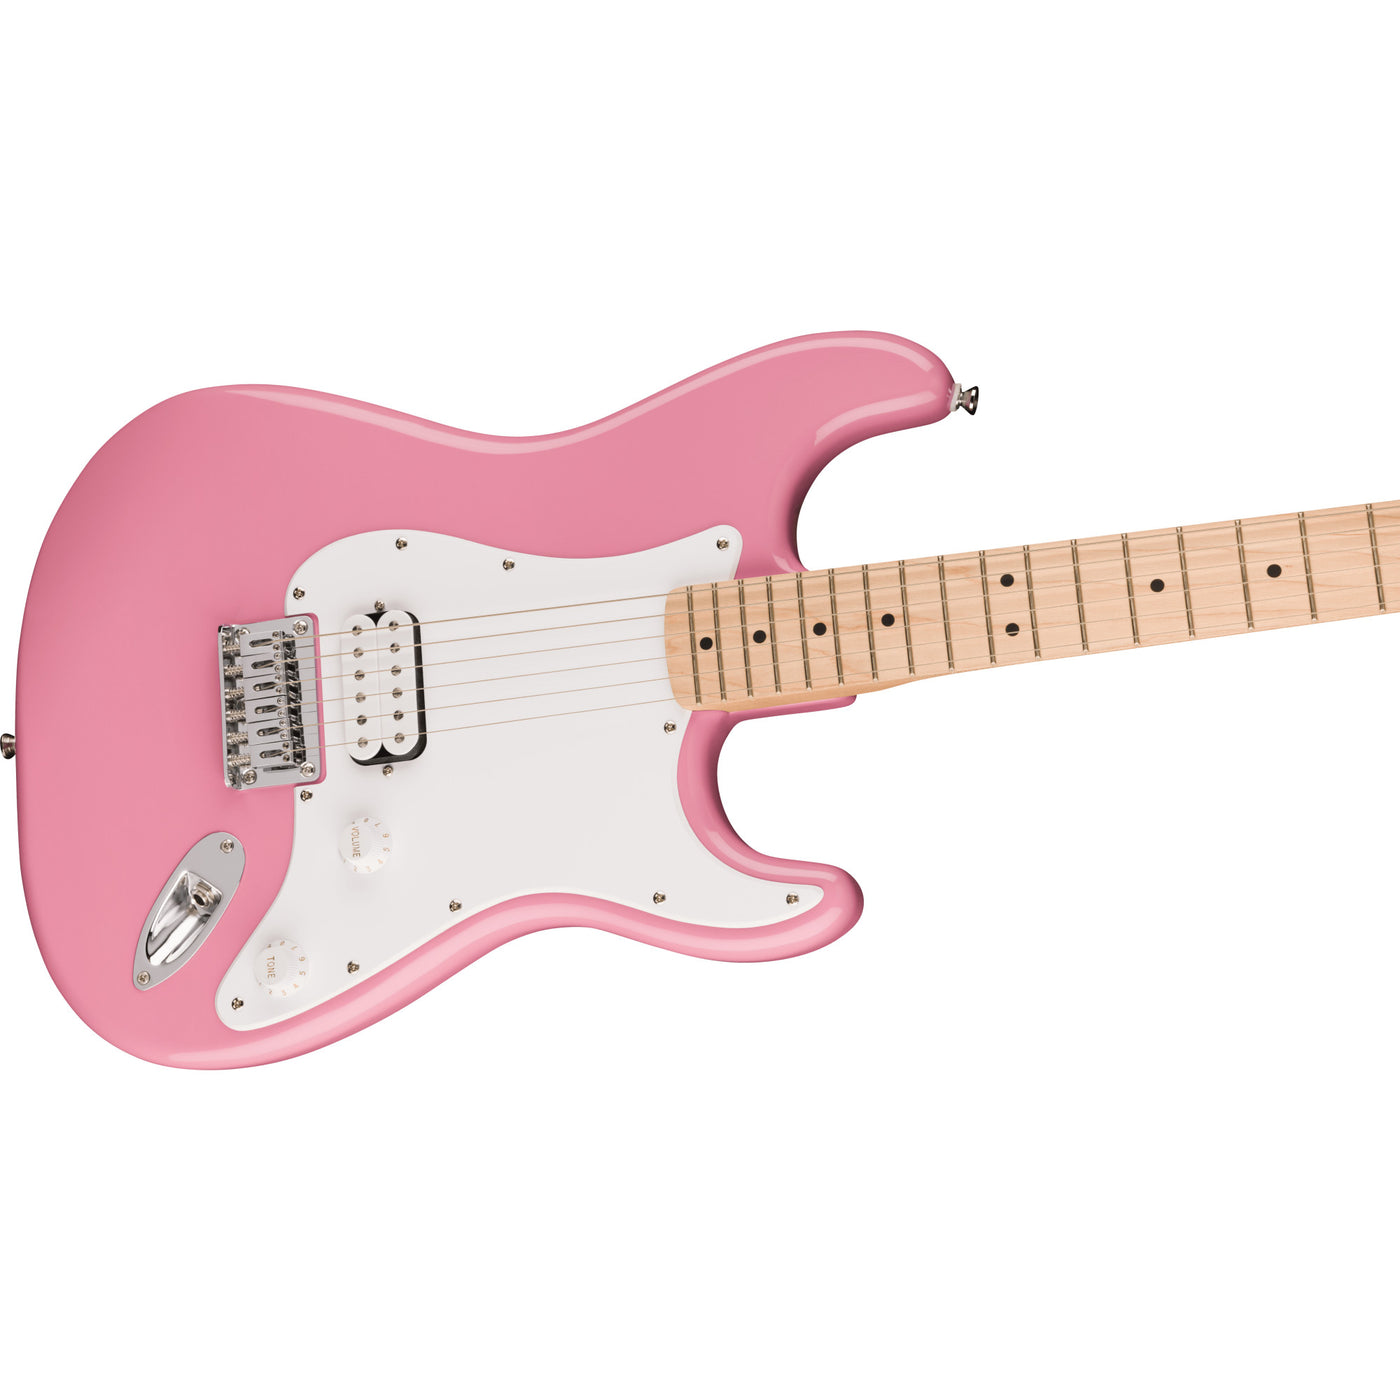 Squier Sonic Stratocaster HT H Electric Guitar, Flash Pink (0373301506)